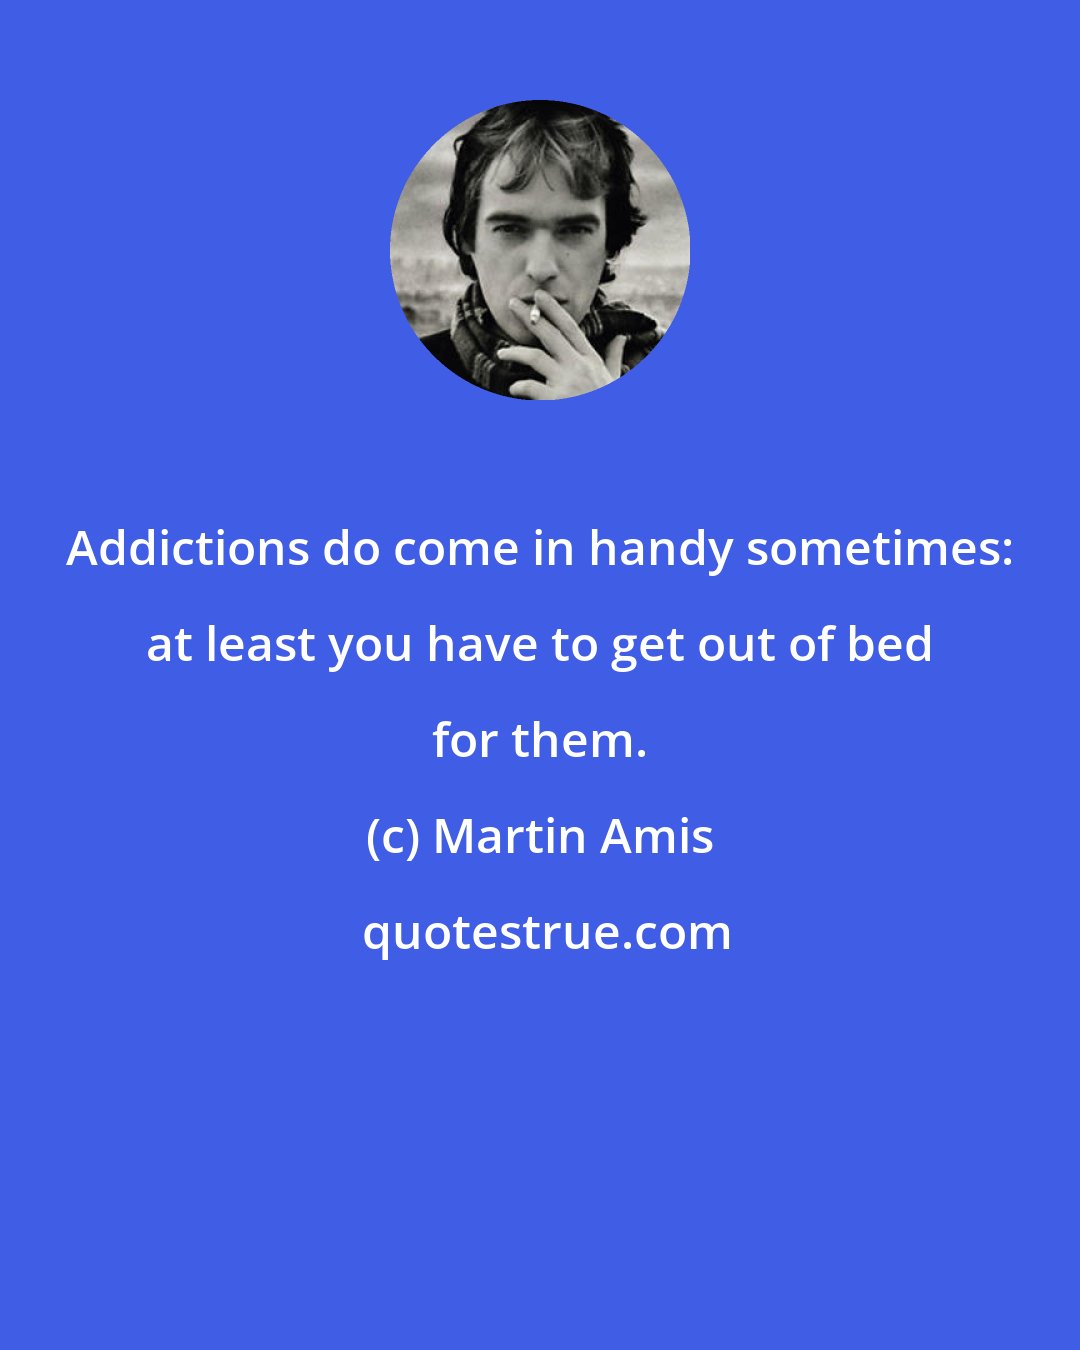 Martin Amis: Addictions do come in handy sometimes: at least you have to get out of bed for them.